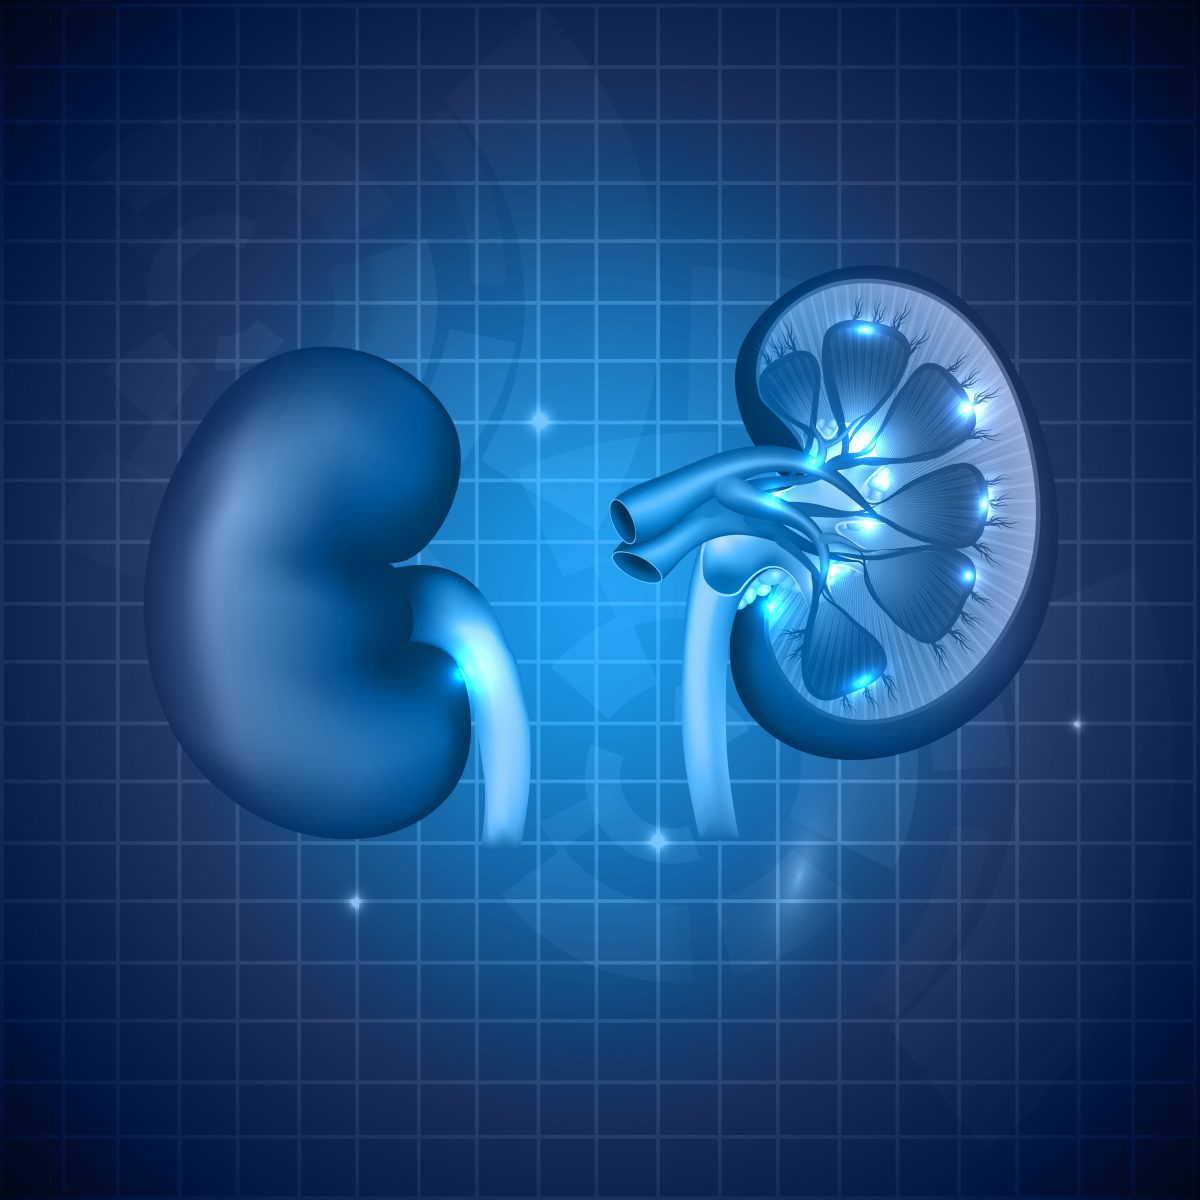 Researchers Review Clinical Trial Design for Lupus Nephritis Therapies